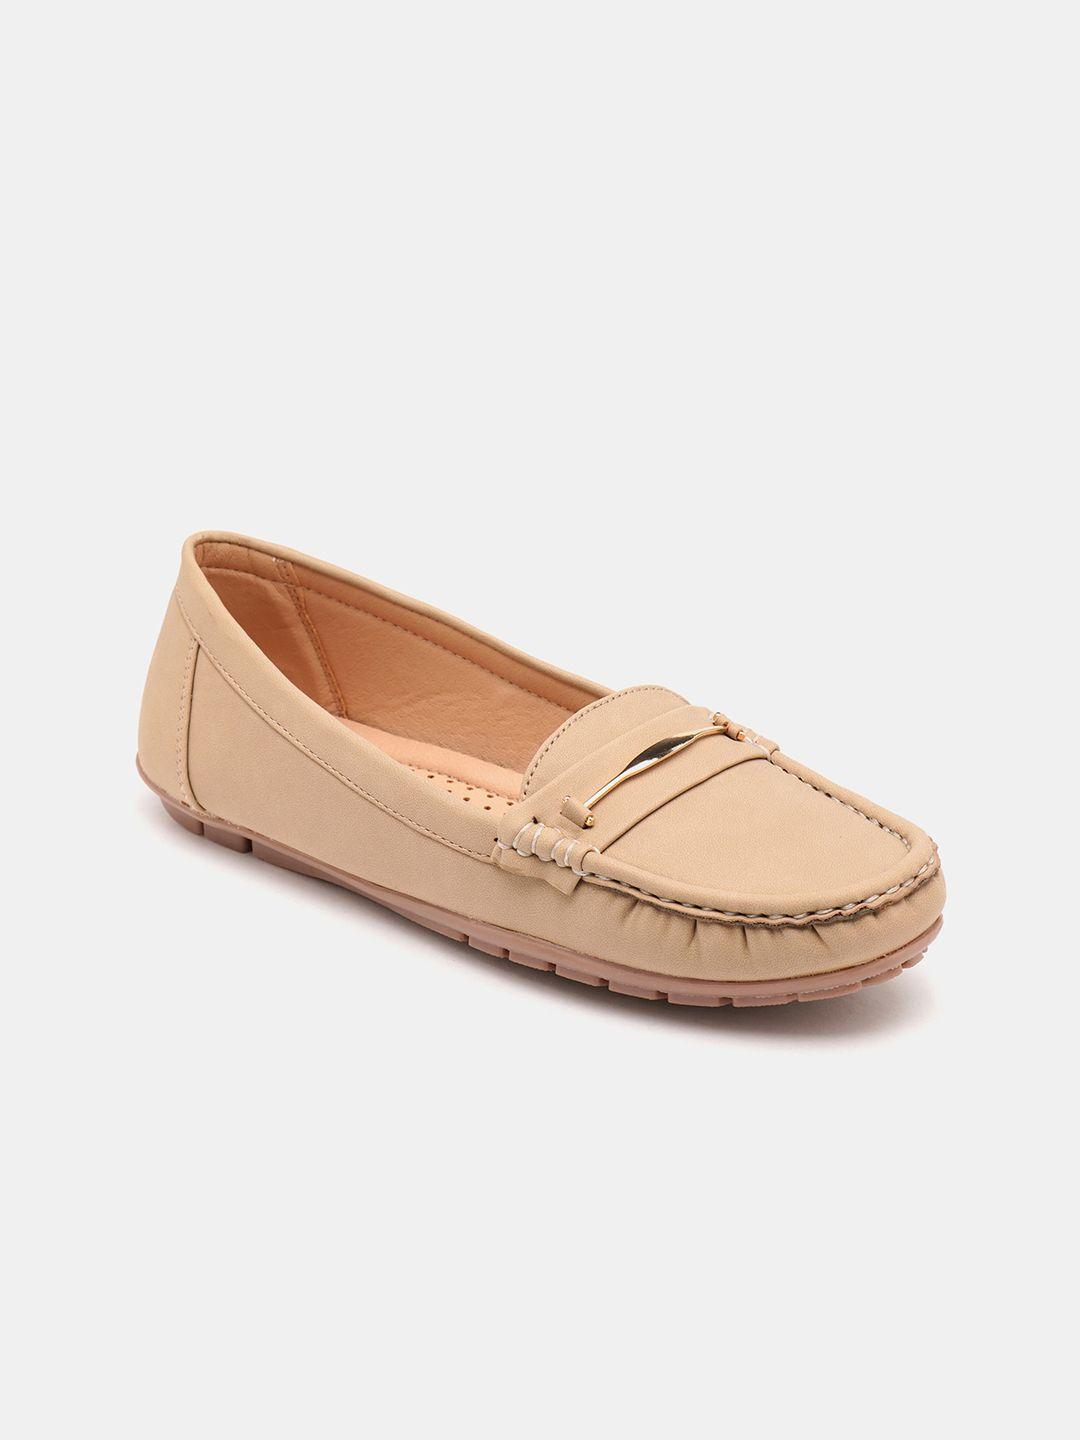 r&b women textured penny loafers